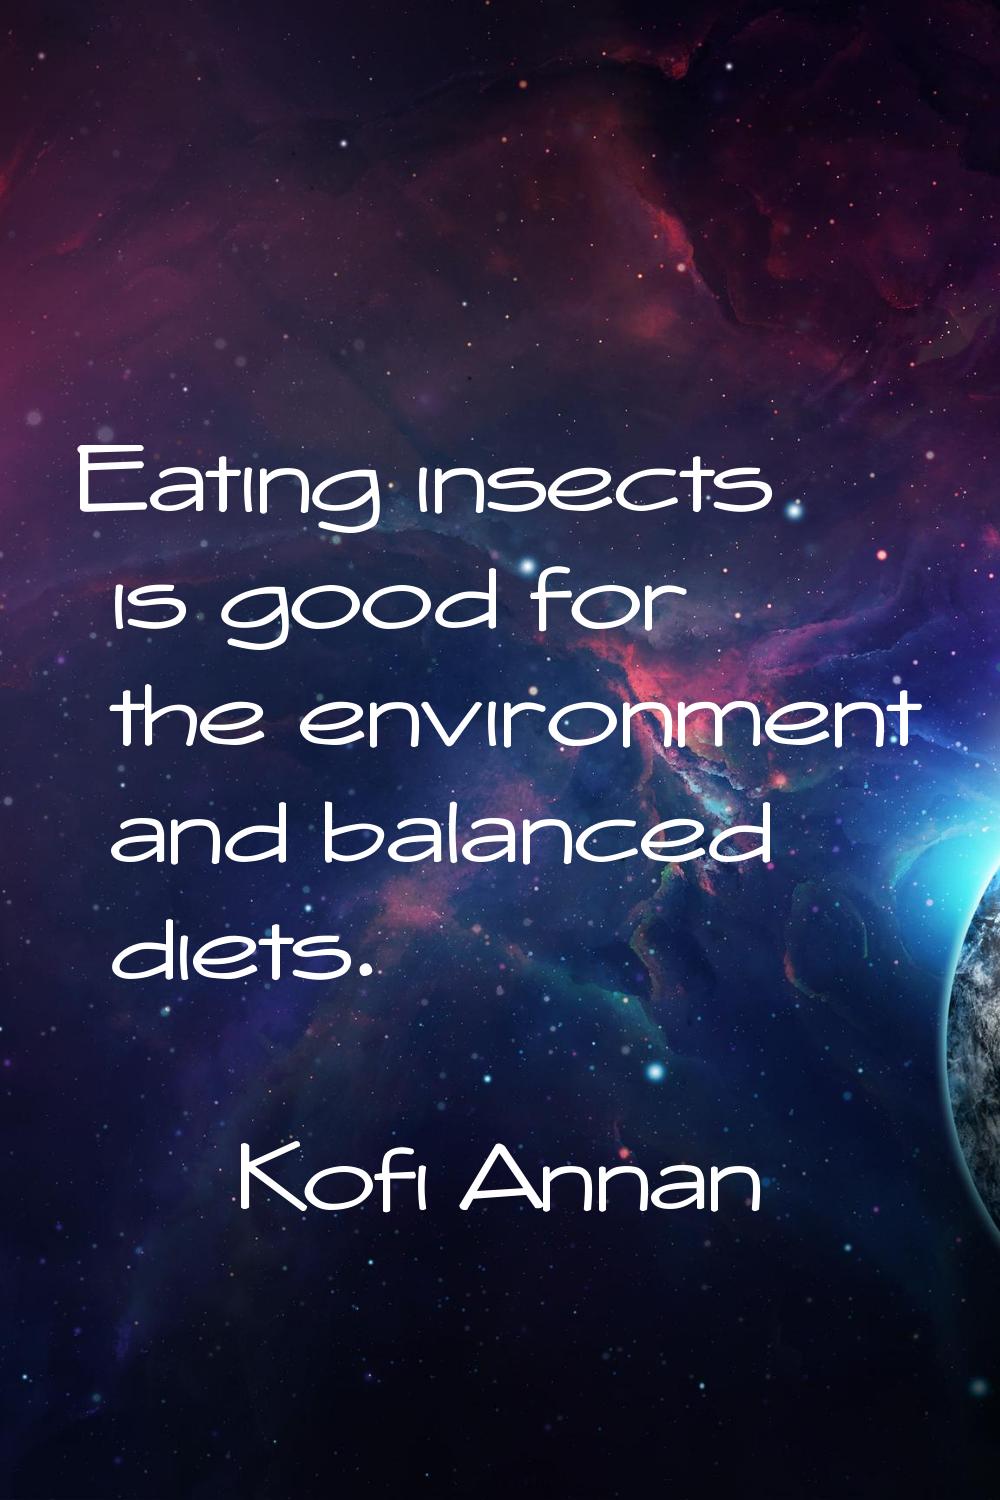 Eating insects is good for the environment and balanced diets.